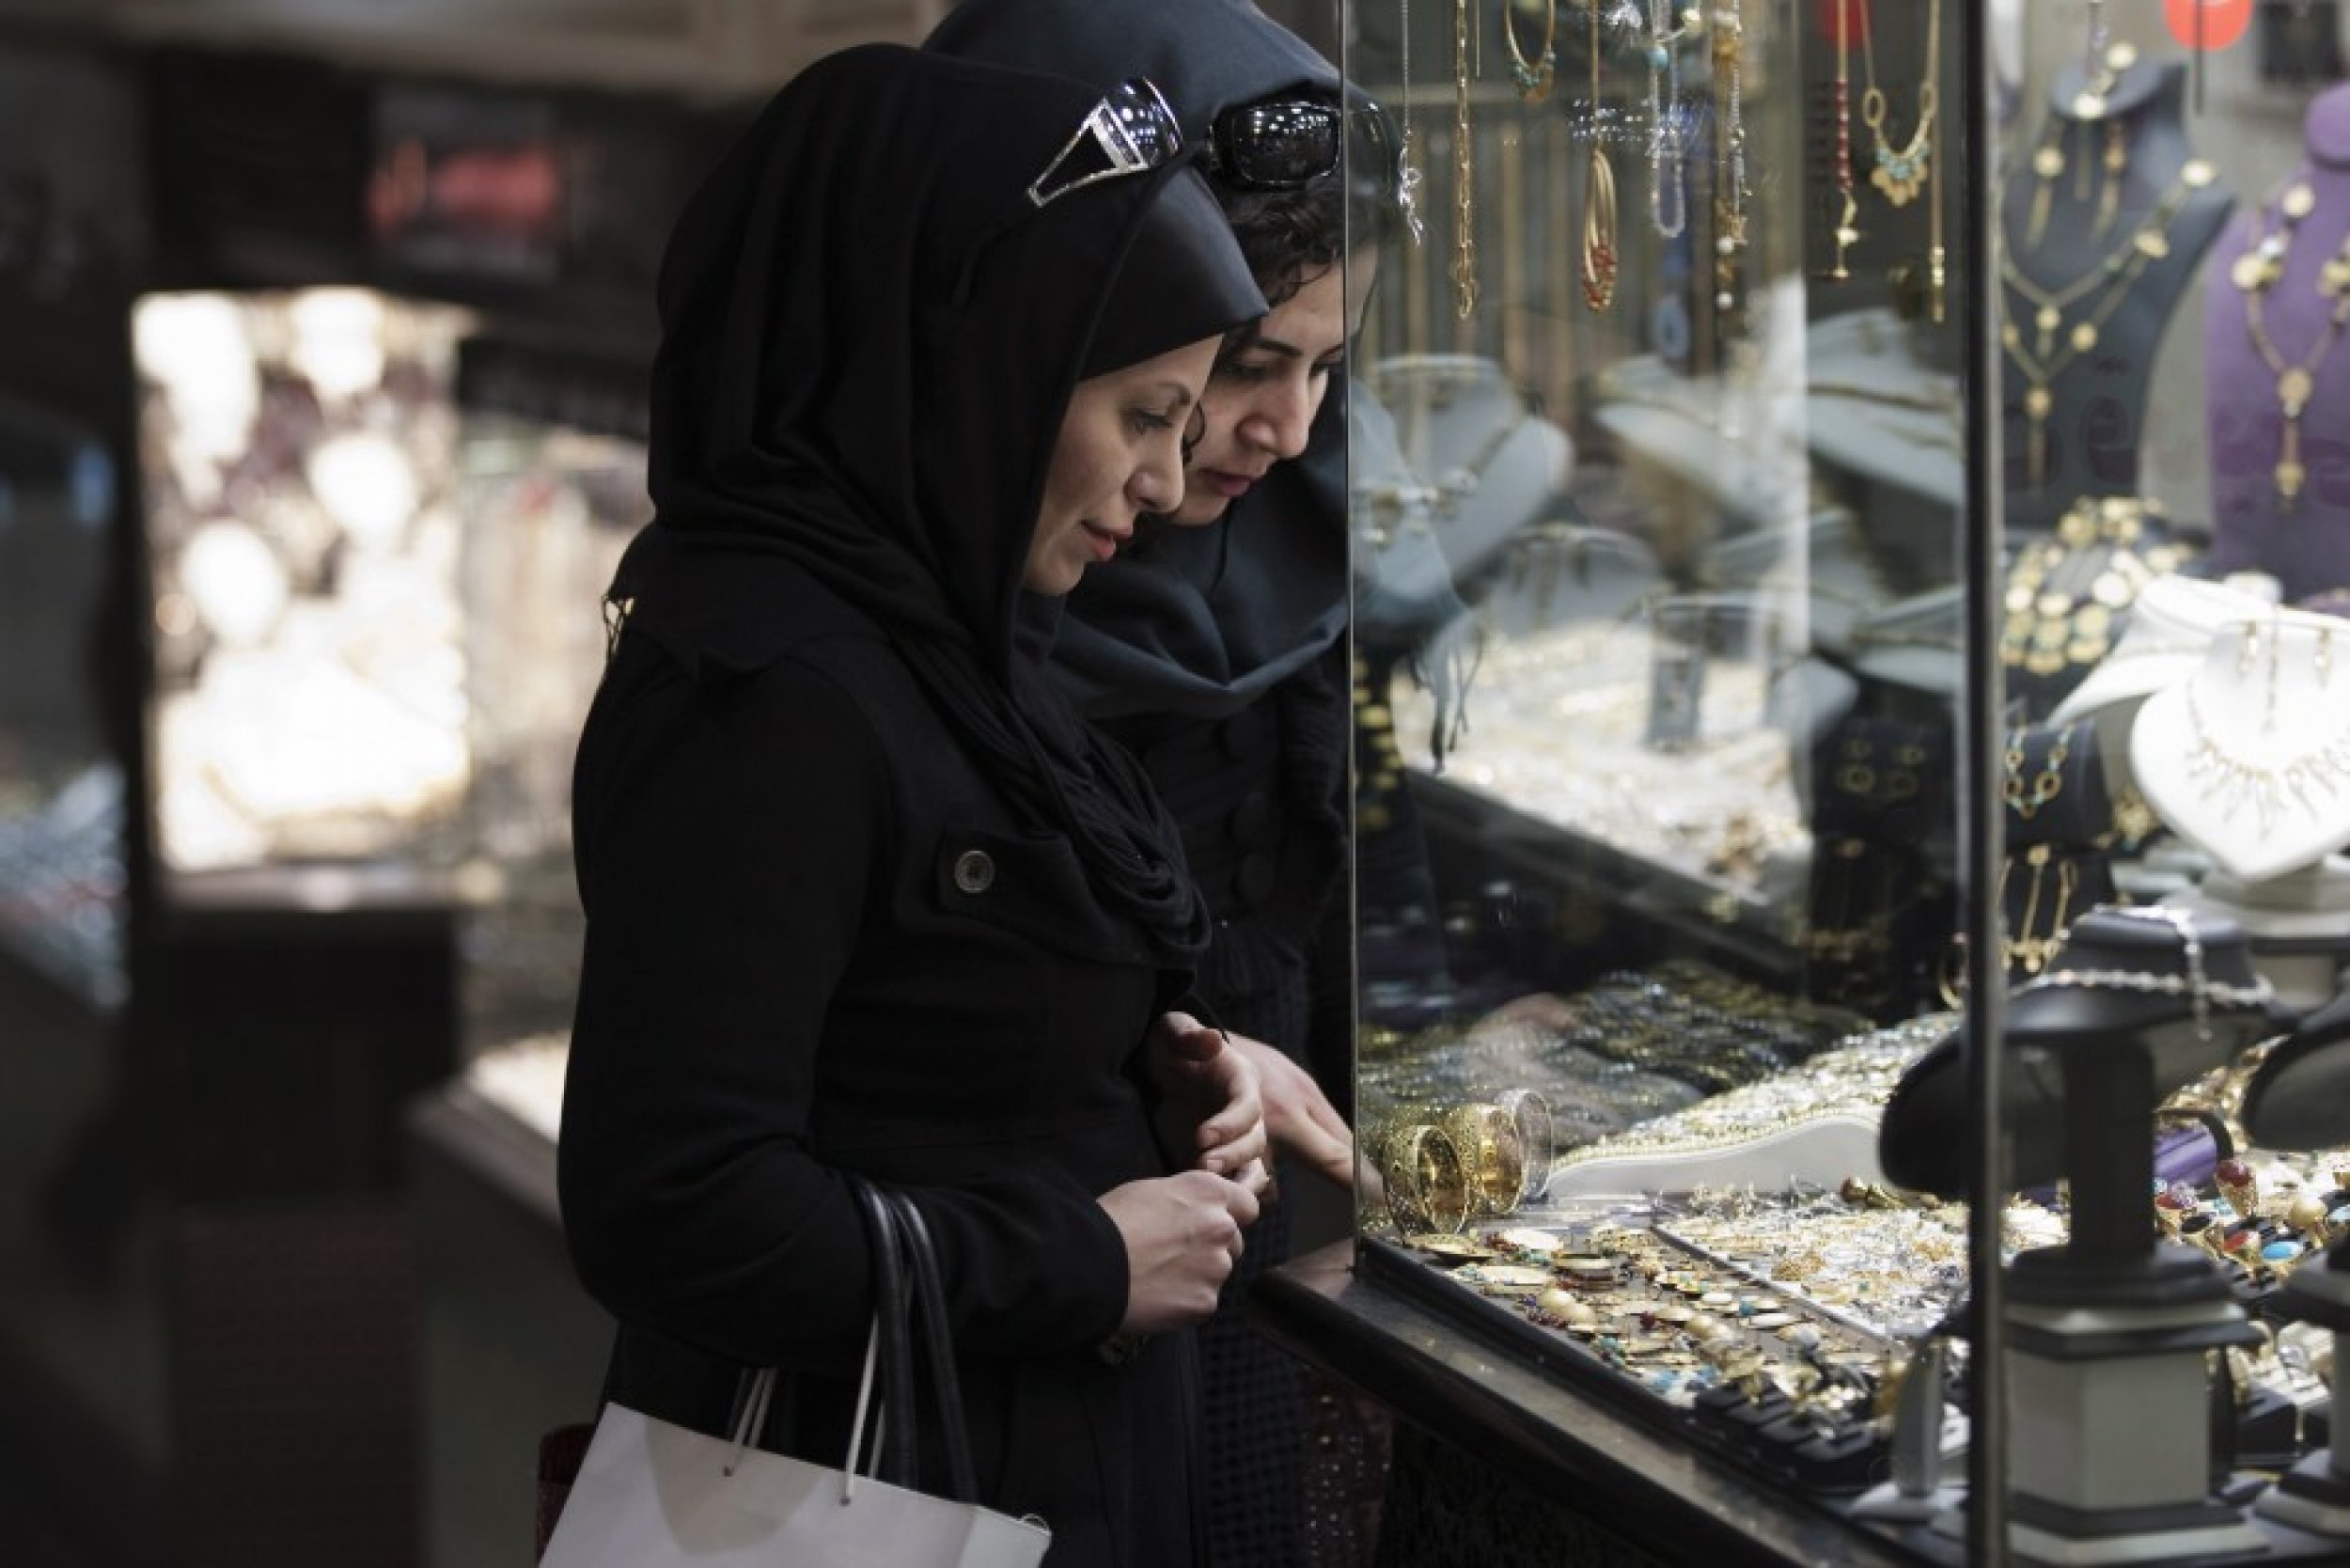 Women look at jewelry while shopping in Tehran